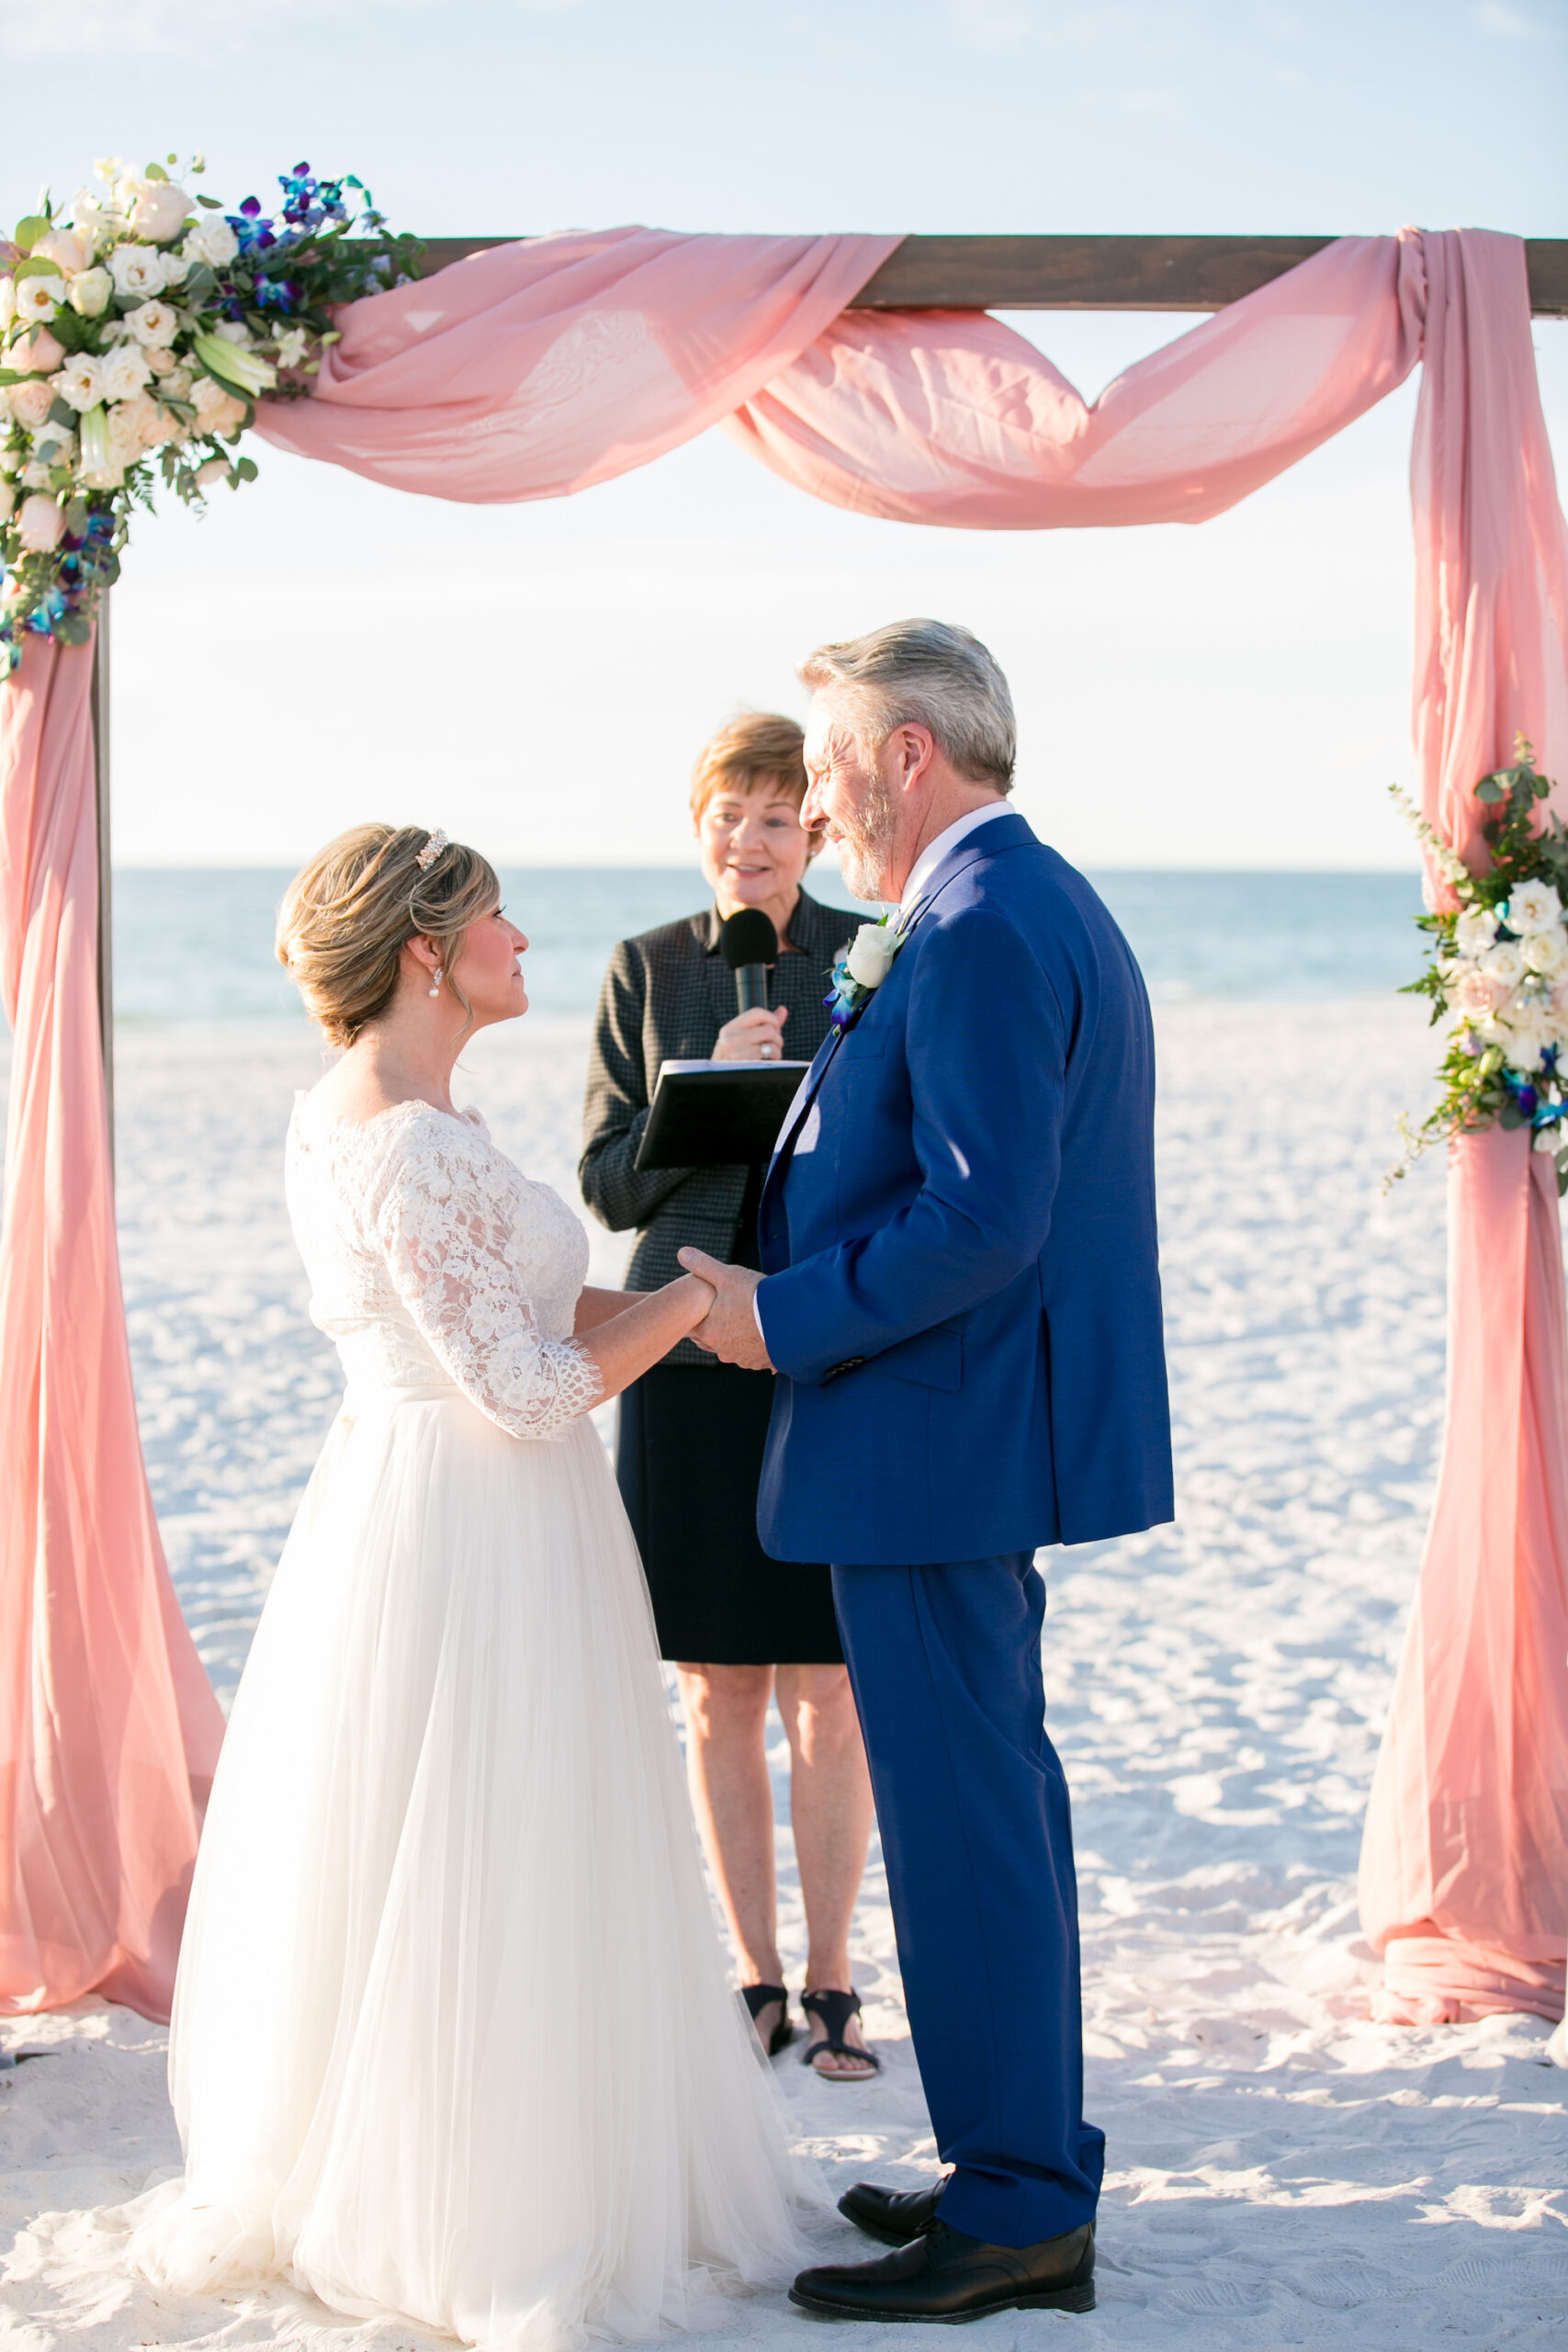 Classic Bride and Groom Exchanging Wedding Vows on Beach | Tampa Bay Wedding Photographer Carrie Wildes Photography | Wedding Officiant A Wedding with Grace | St. Pete Wedding Venue The Don CeSar